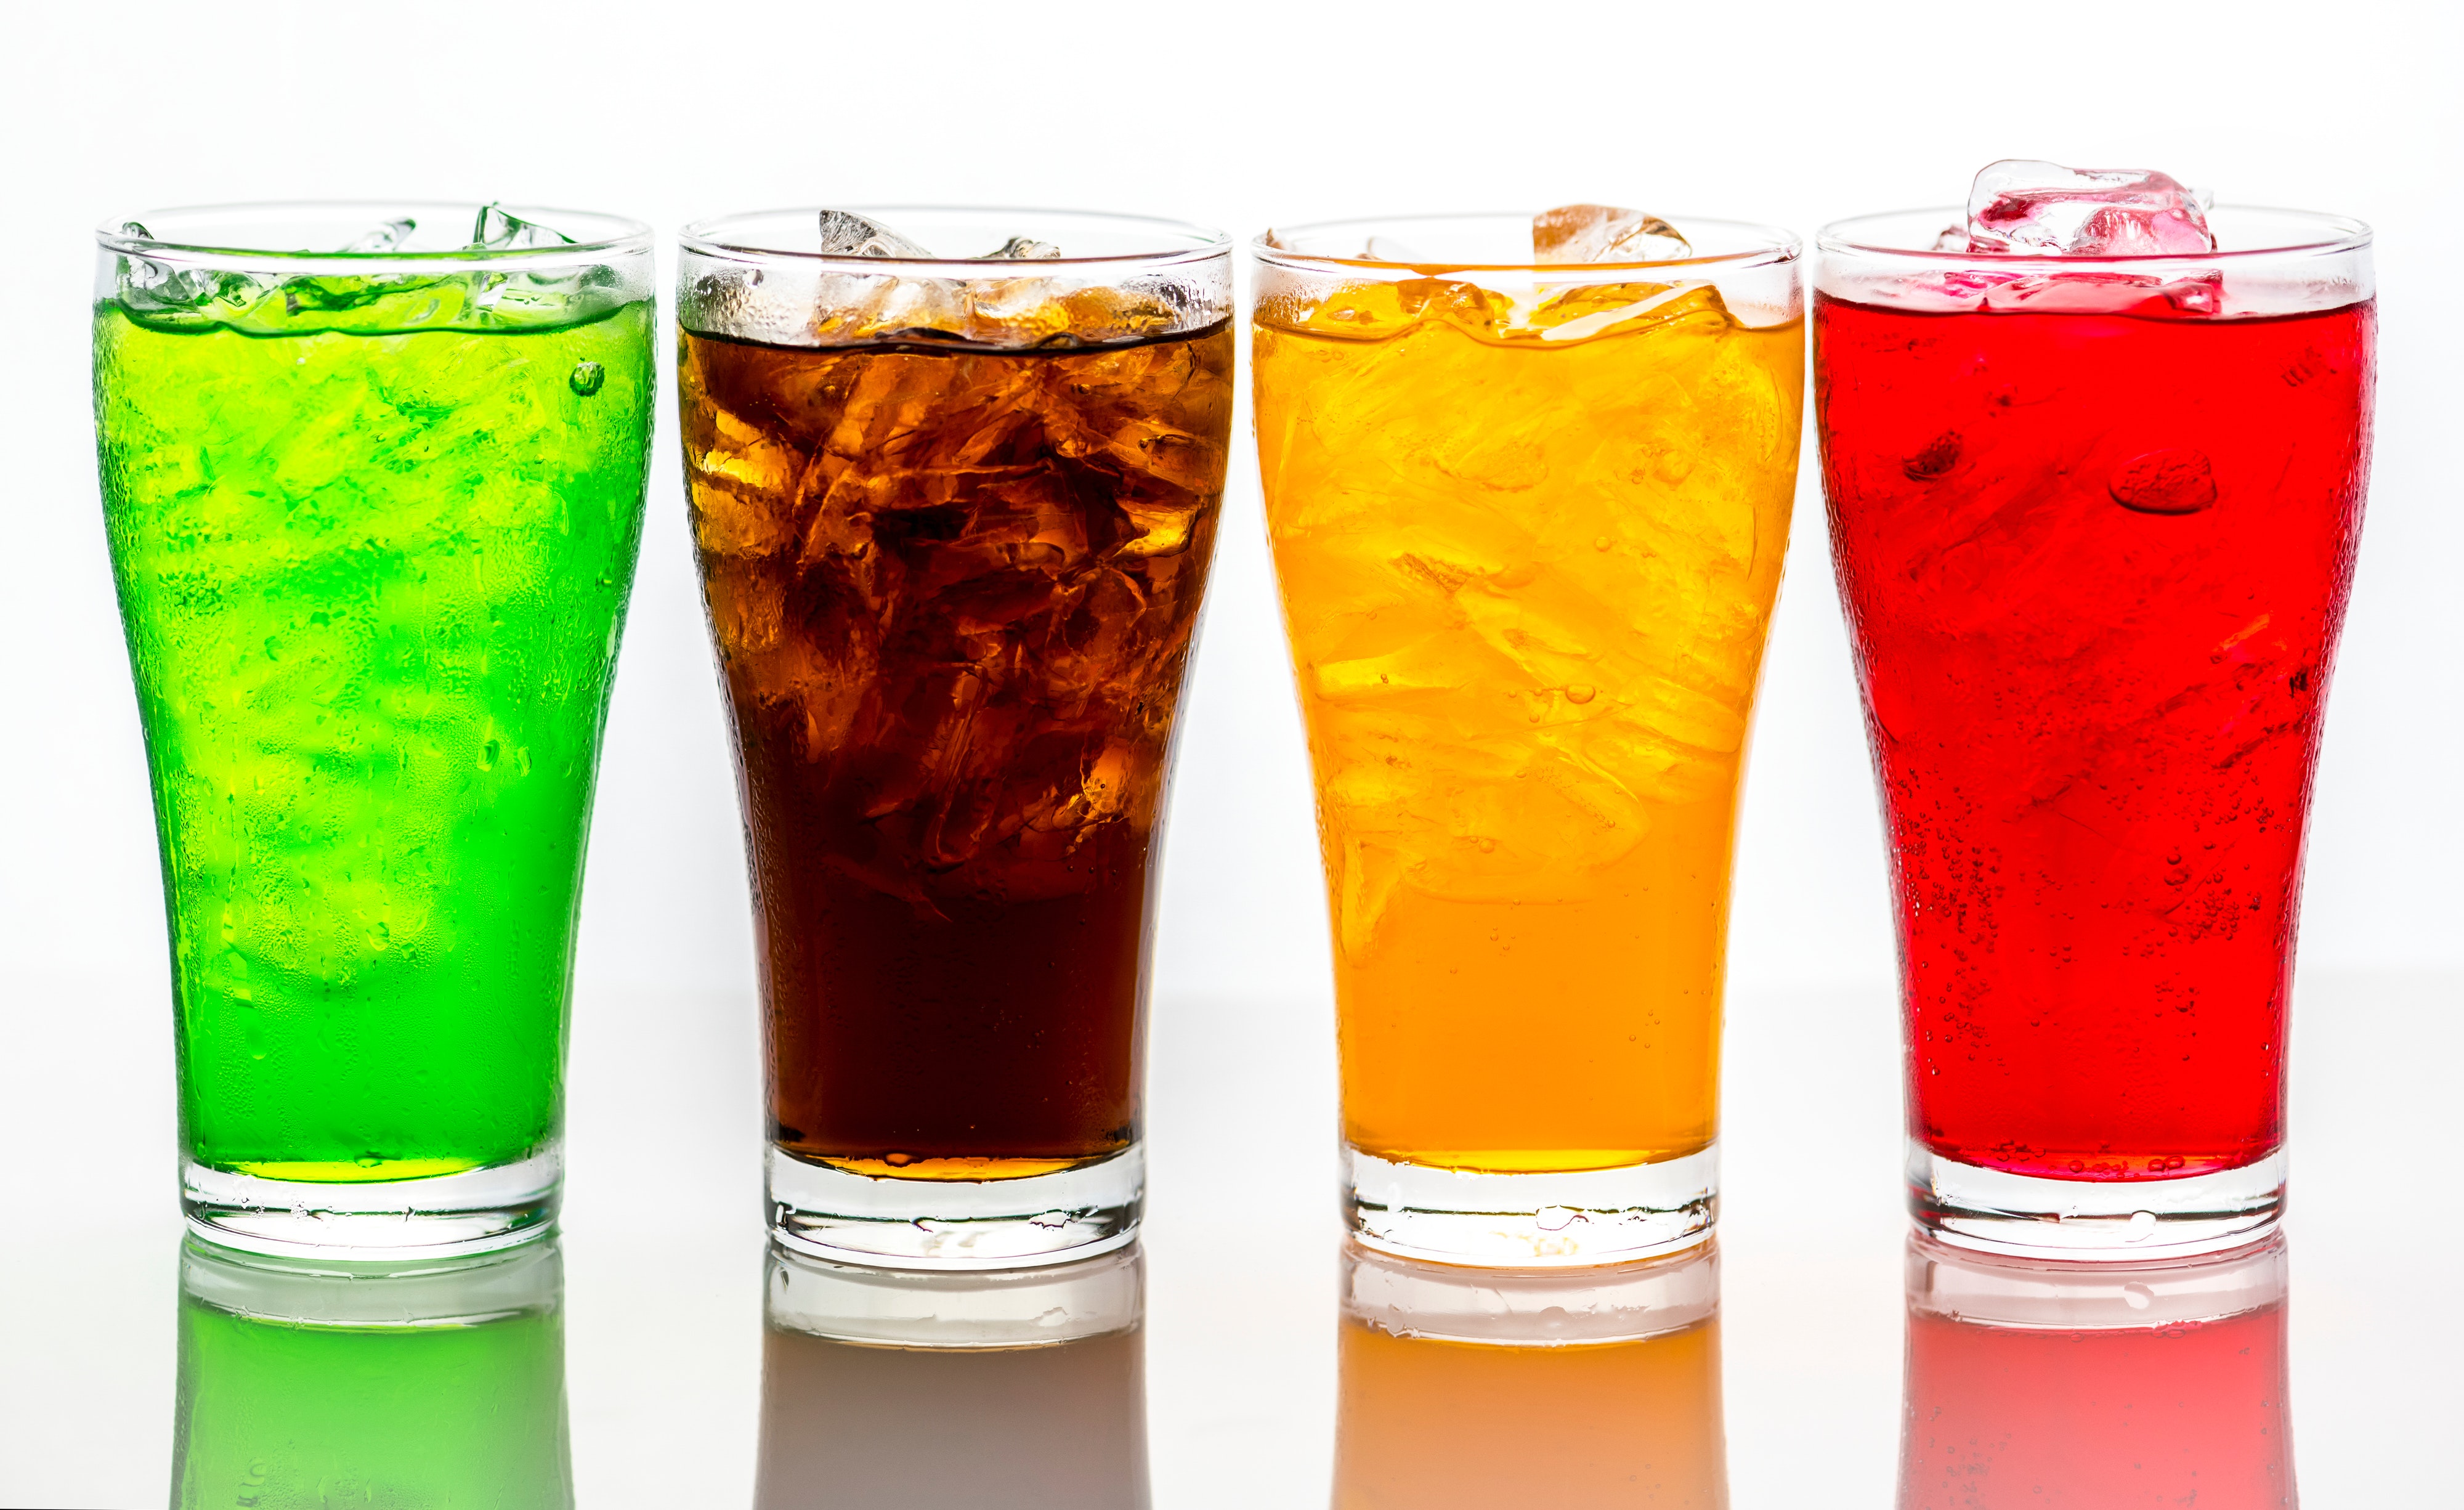 The Soft Drink Manufacturing And Carbonated Beverages